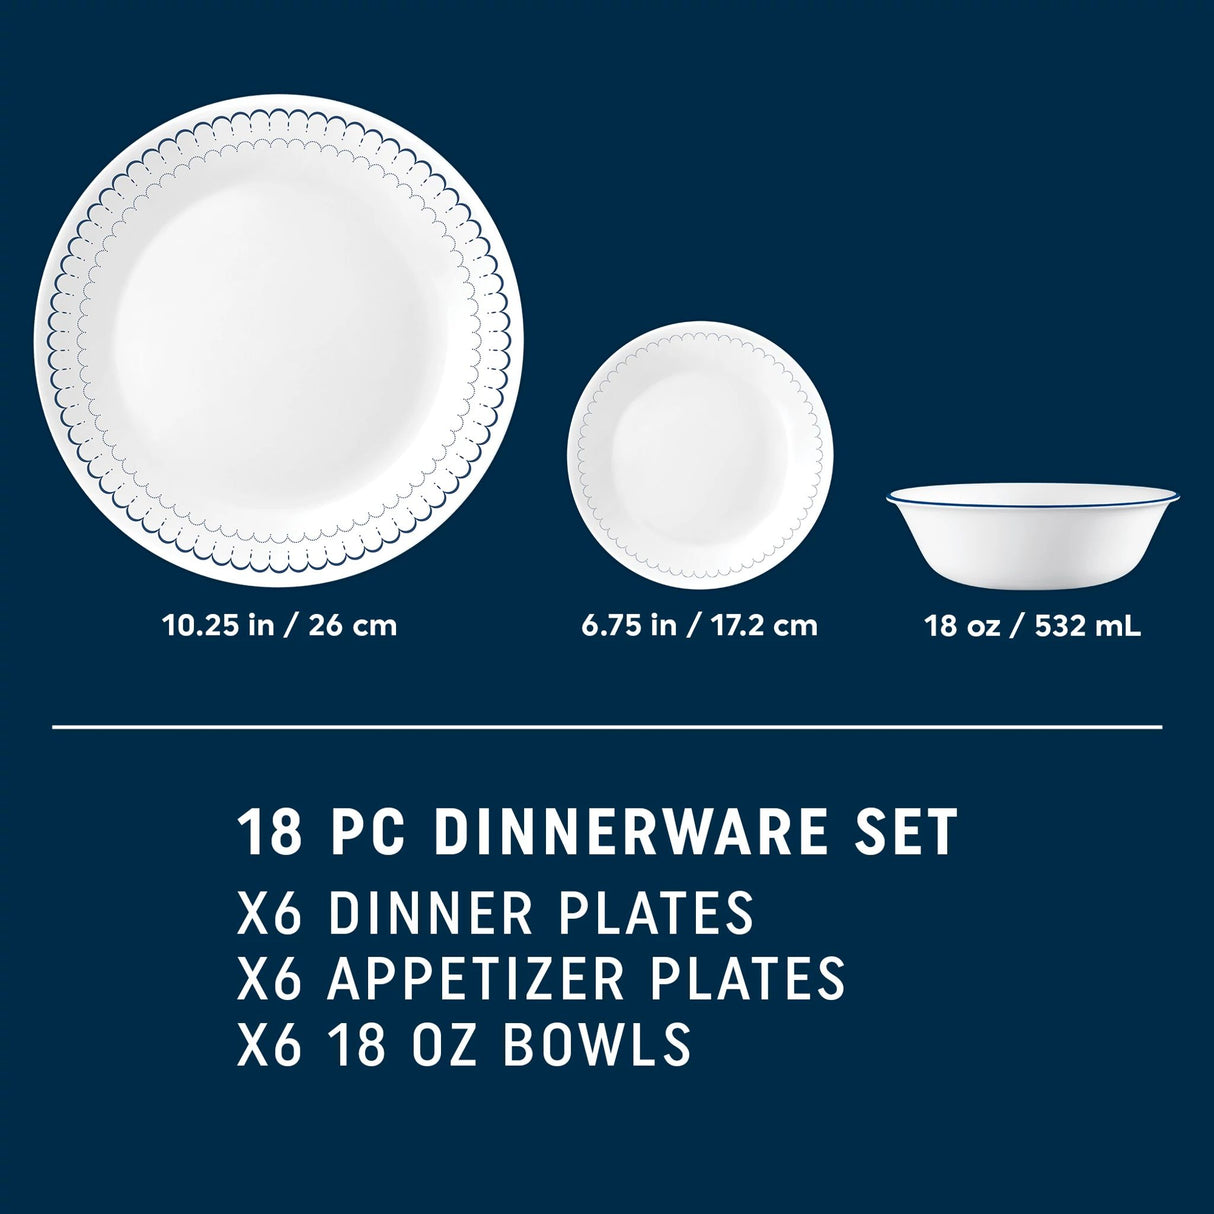  Caspian Lace 6 dinner plates, appetizer plates, and bowls with dimensions